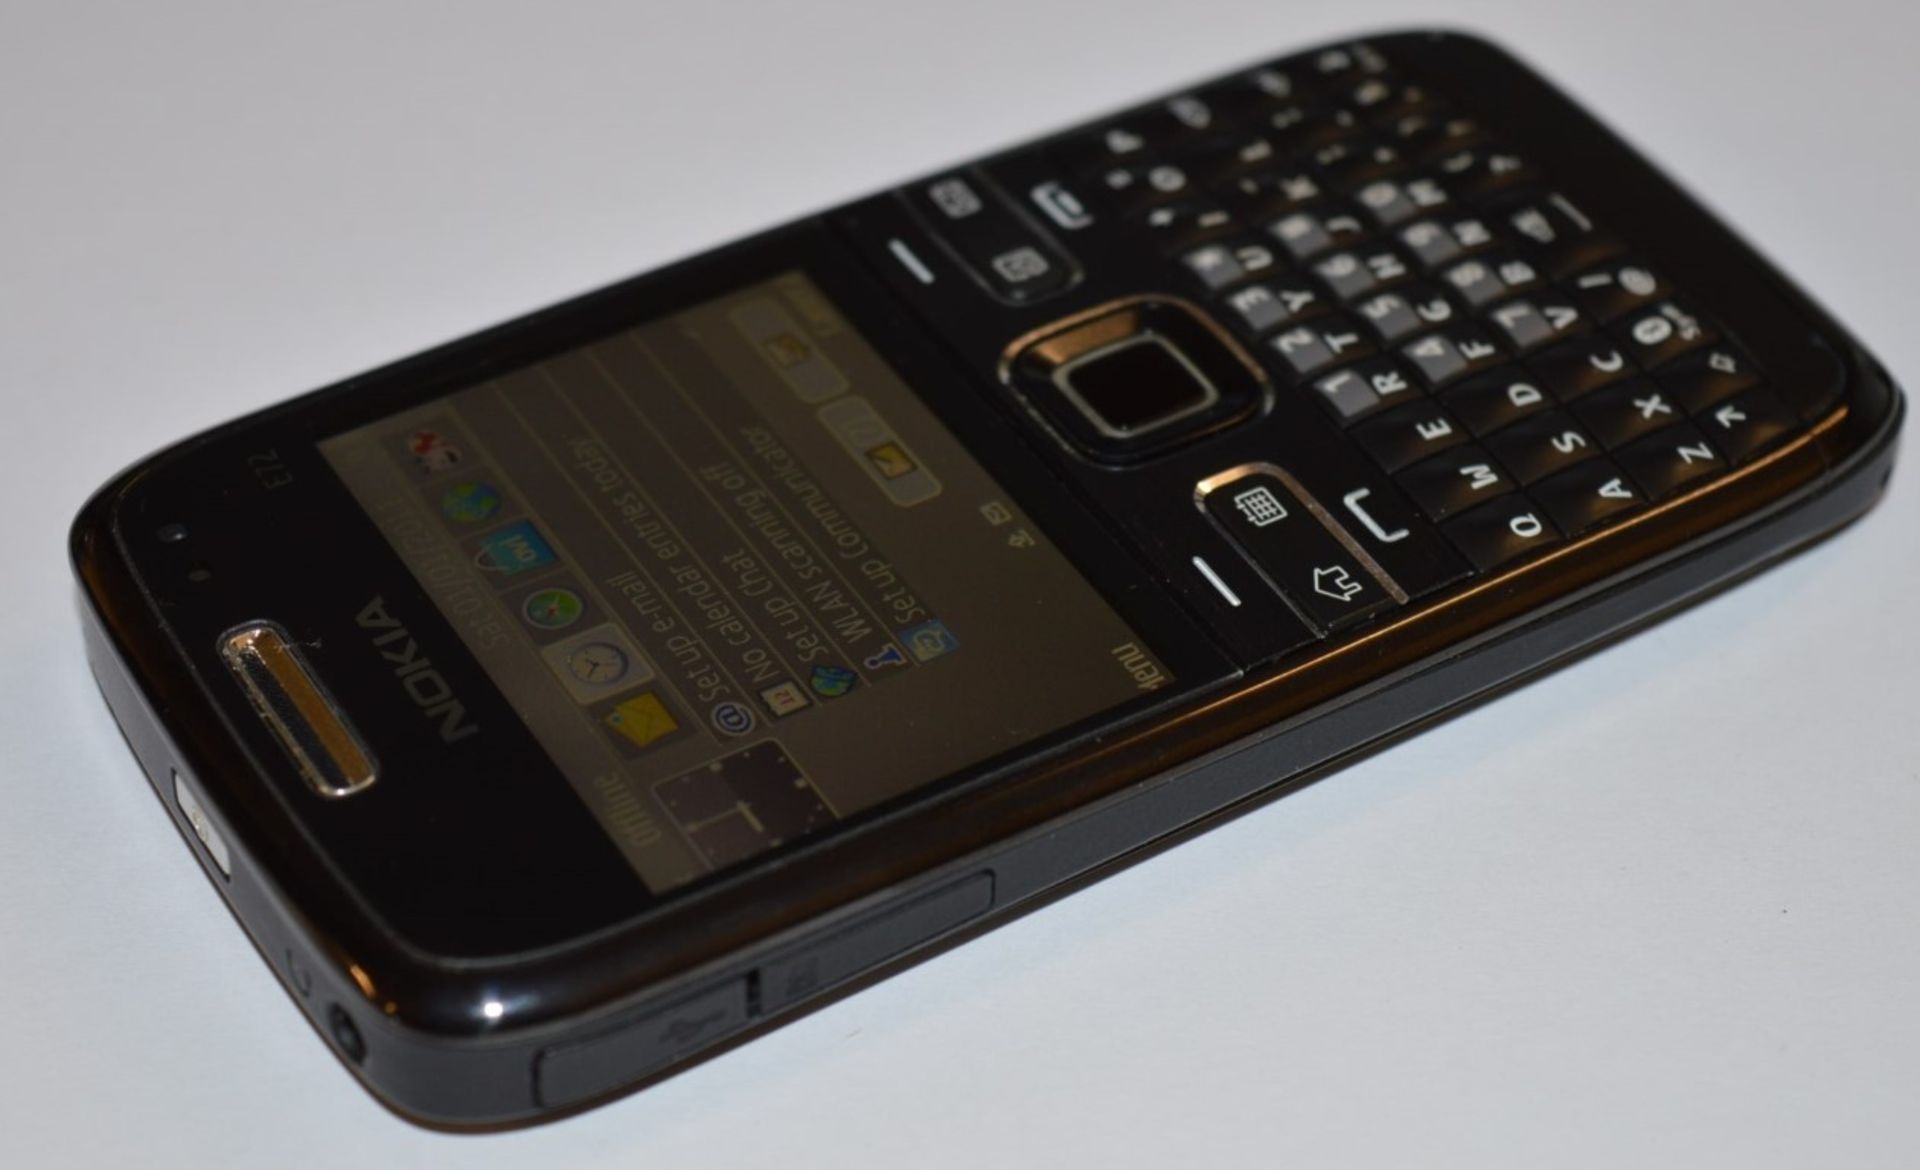 1 x Nokia E72 Mobile Phone Handset With Charger - Features Qwerty Keyboard, 600mhz CPU, 250mb - Image 2 of 6